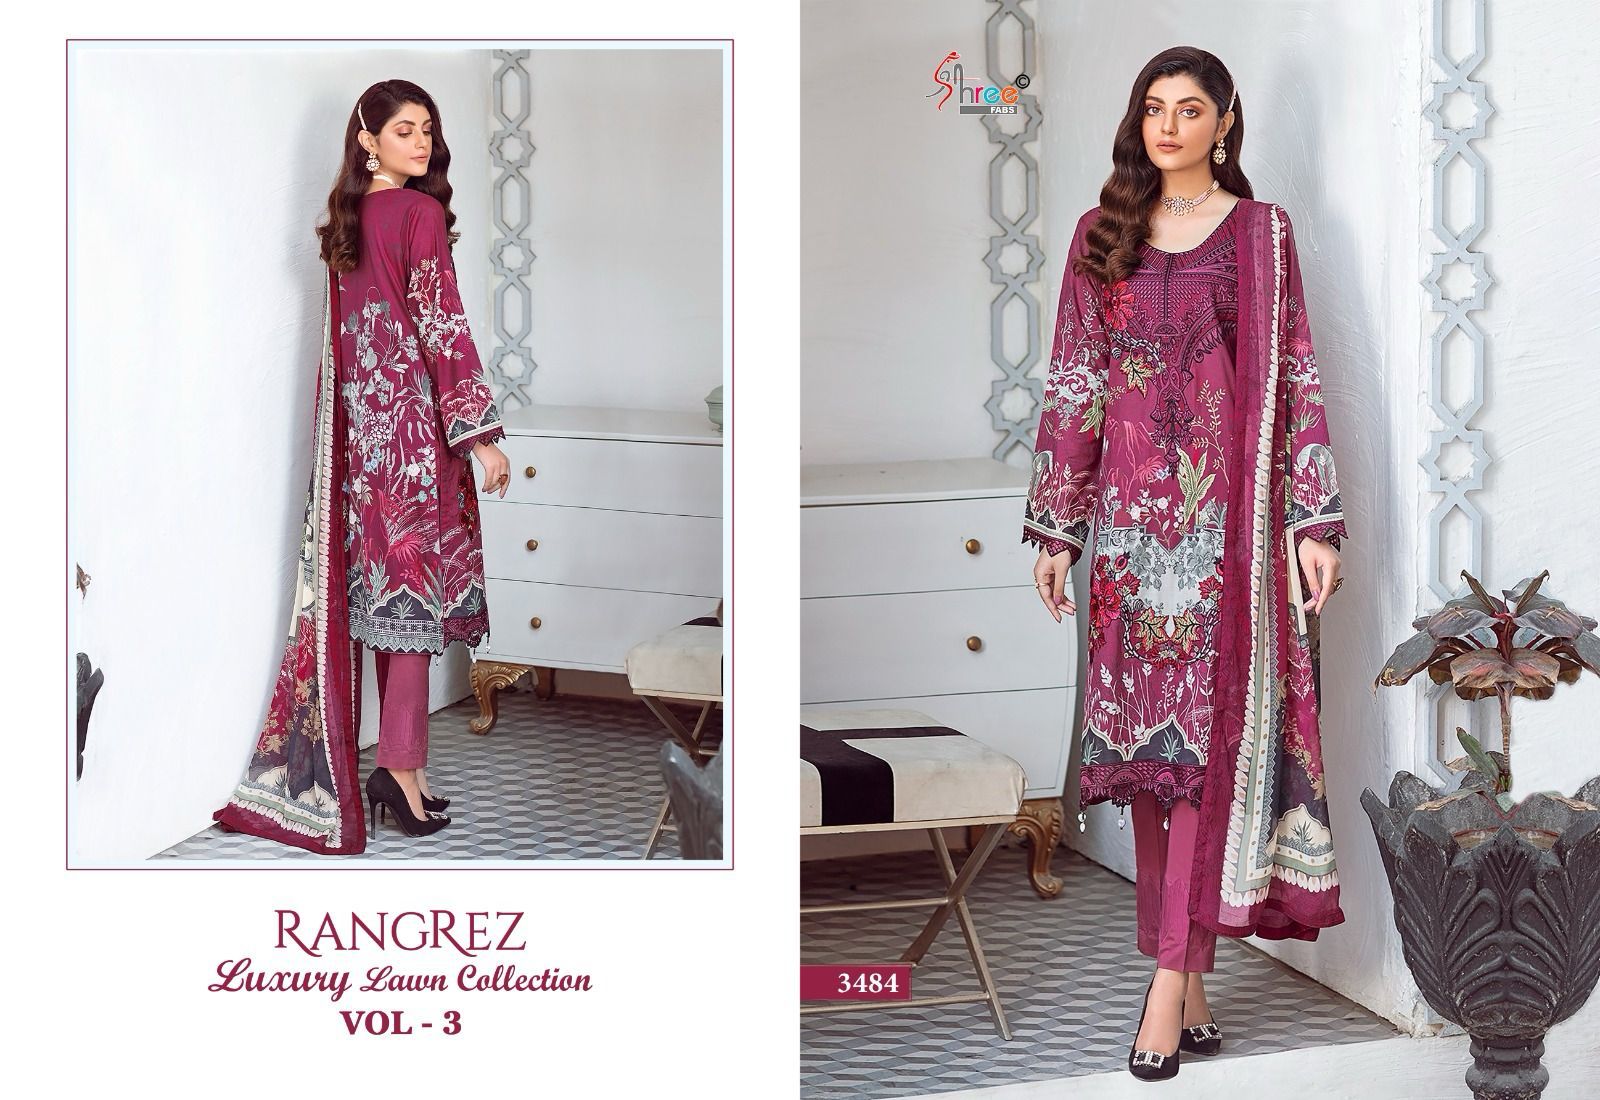 Shree Rangrez Luxury Lawn Collection Vol 3 collection 1